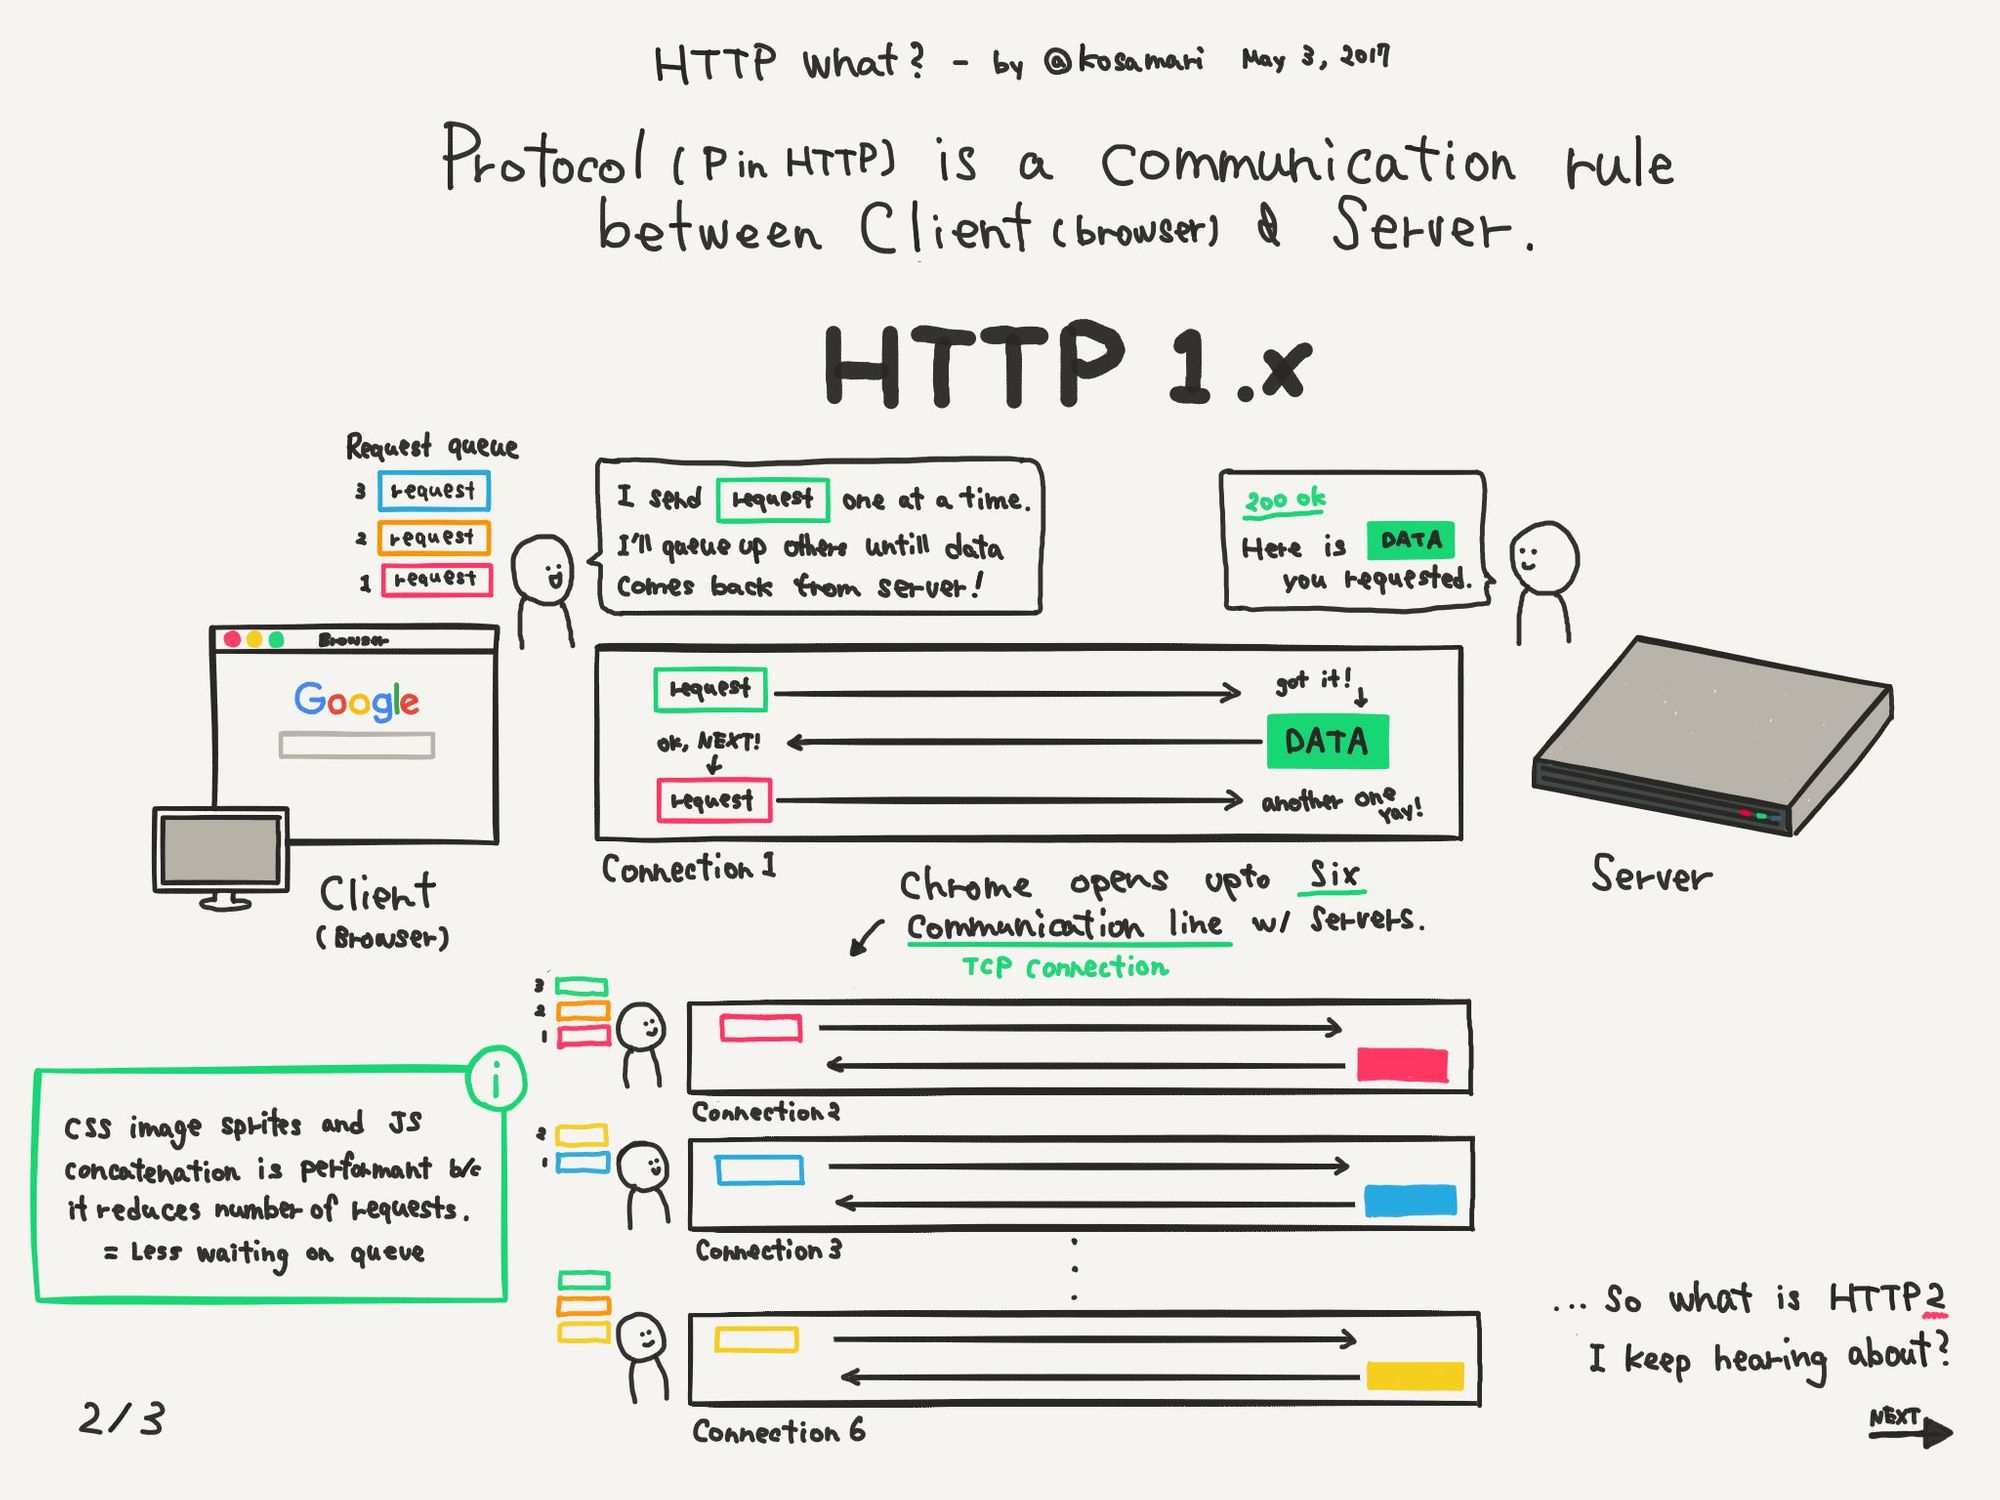 Appunti WAPT: HTTP Request Smuggling con Bash